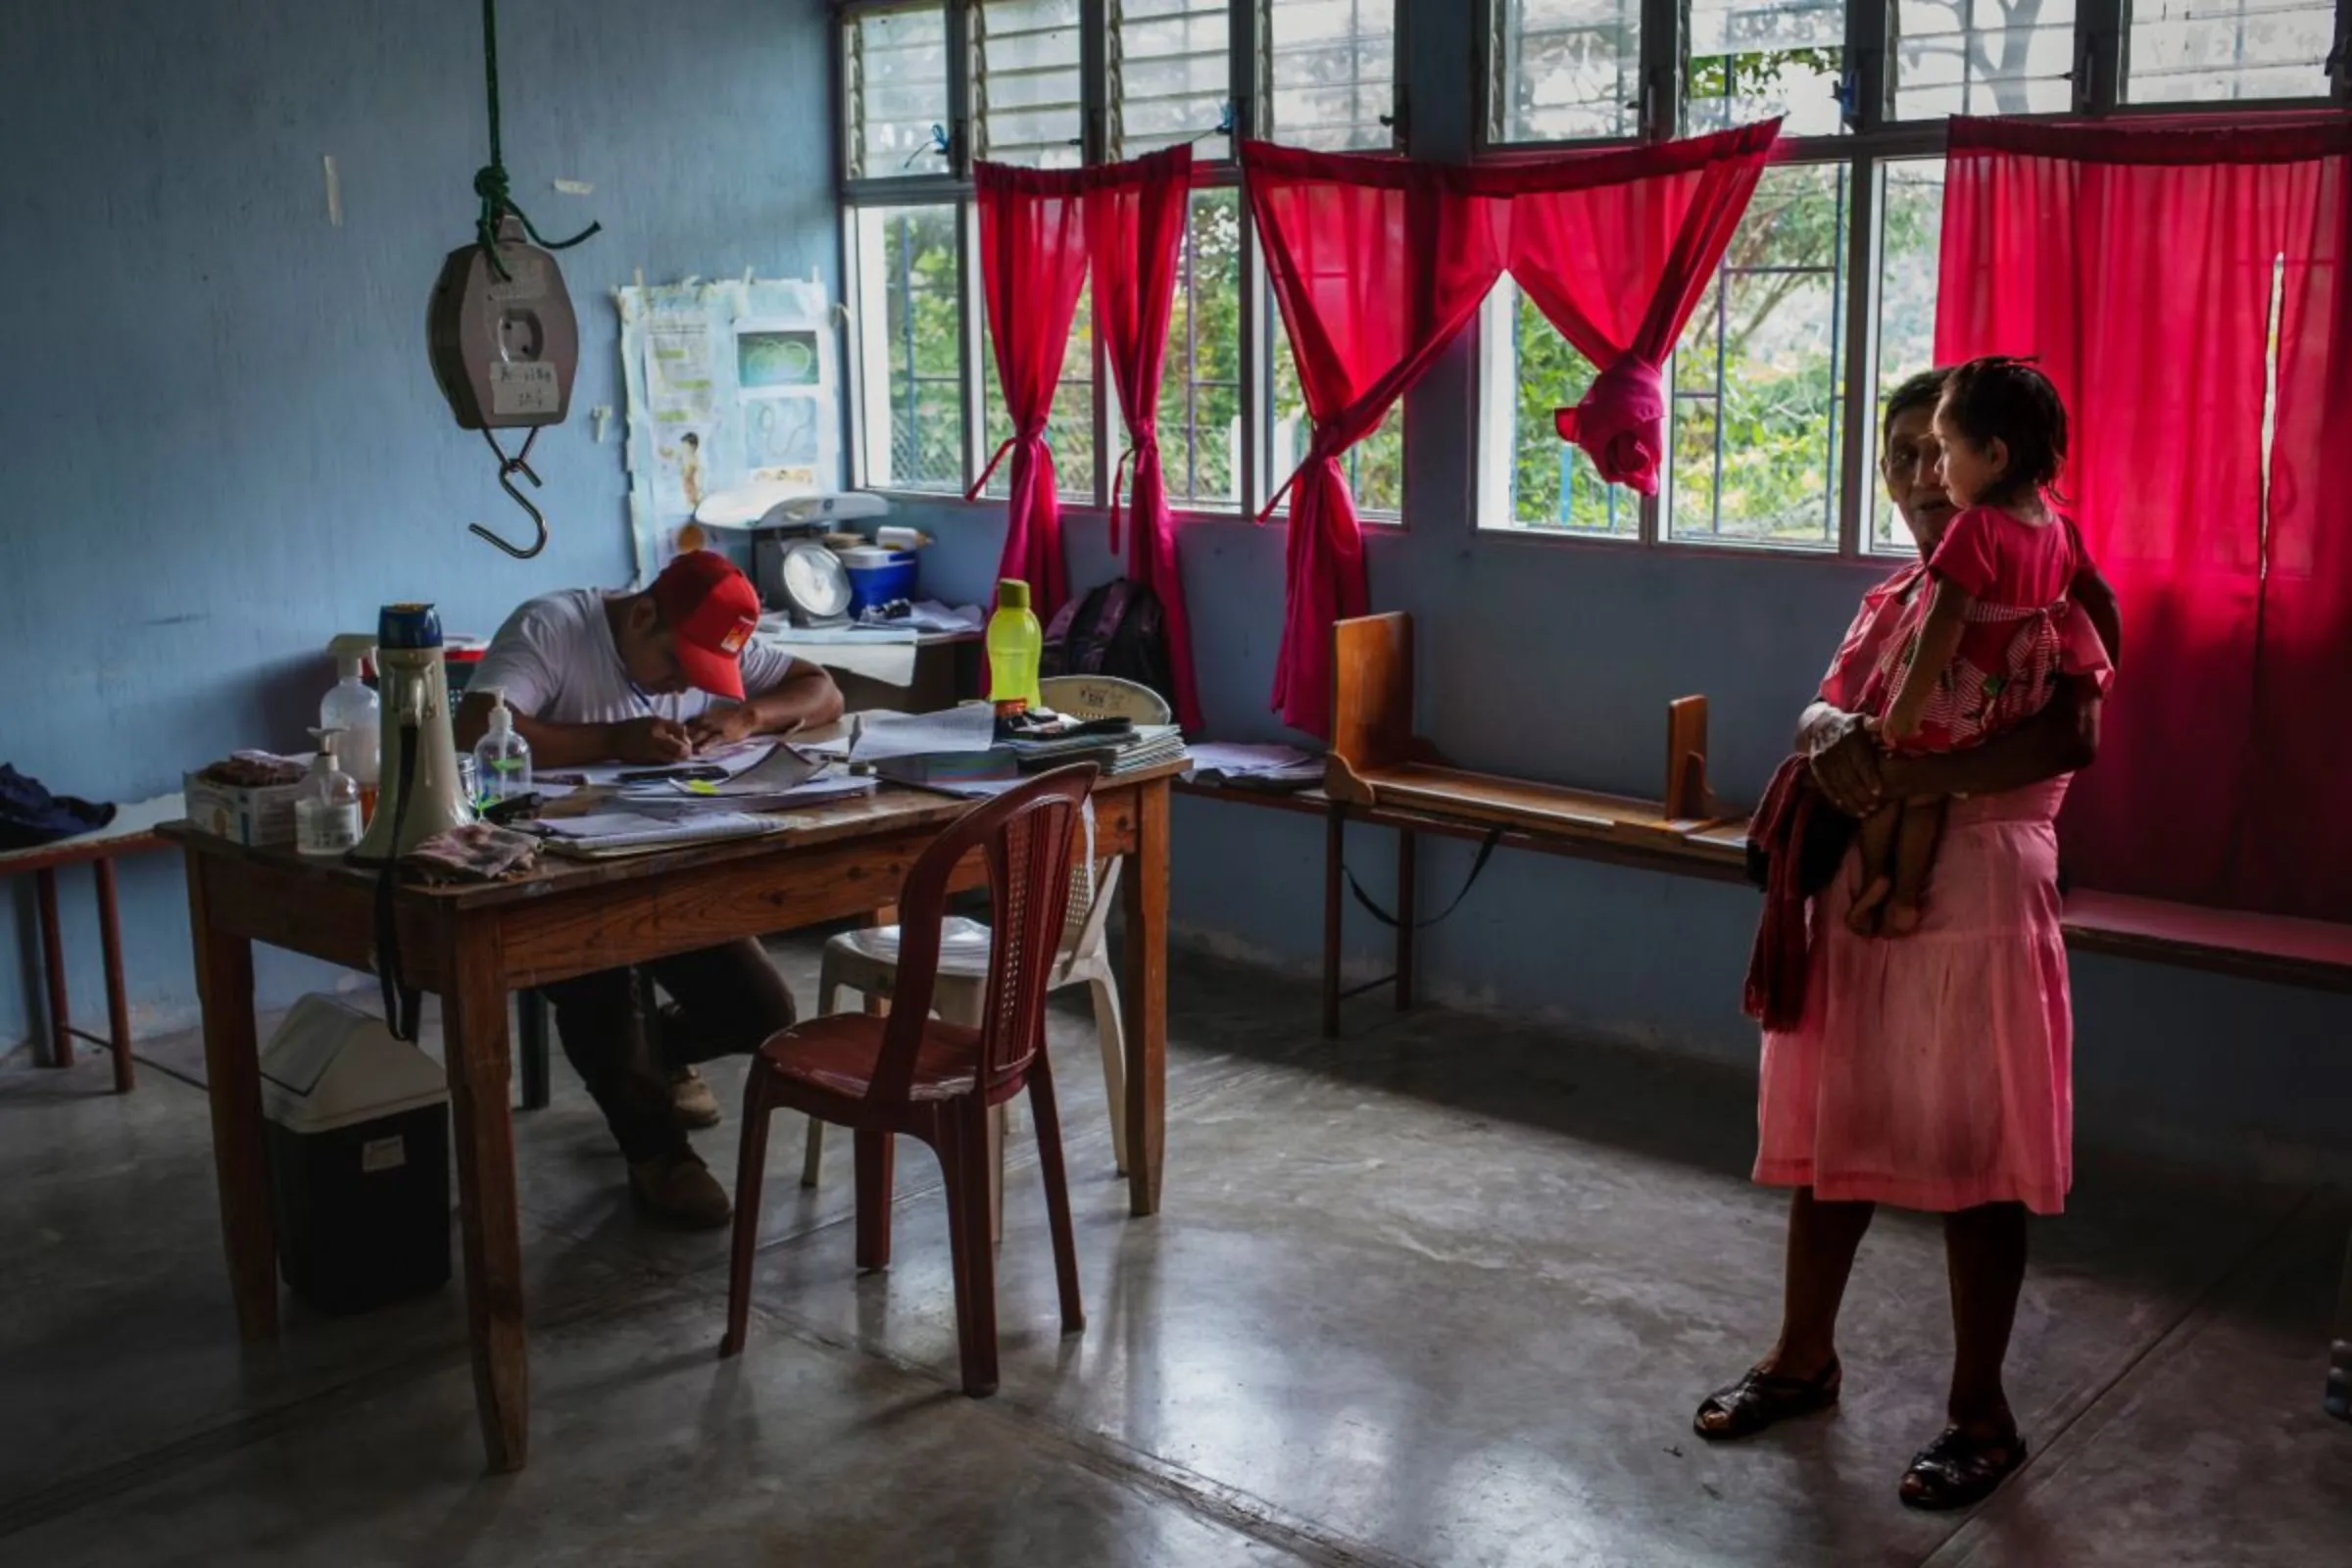 A government nurse makes a record of a malnourished child’s height and weight a medical check-up in a remote rural clinic in the Camotán municipality in the province of Chiquimula, Guatemala, September 8, 2023. Thomson Reuters Foundation / Fabio Cuttica